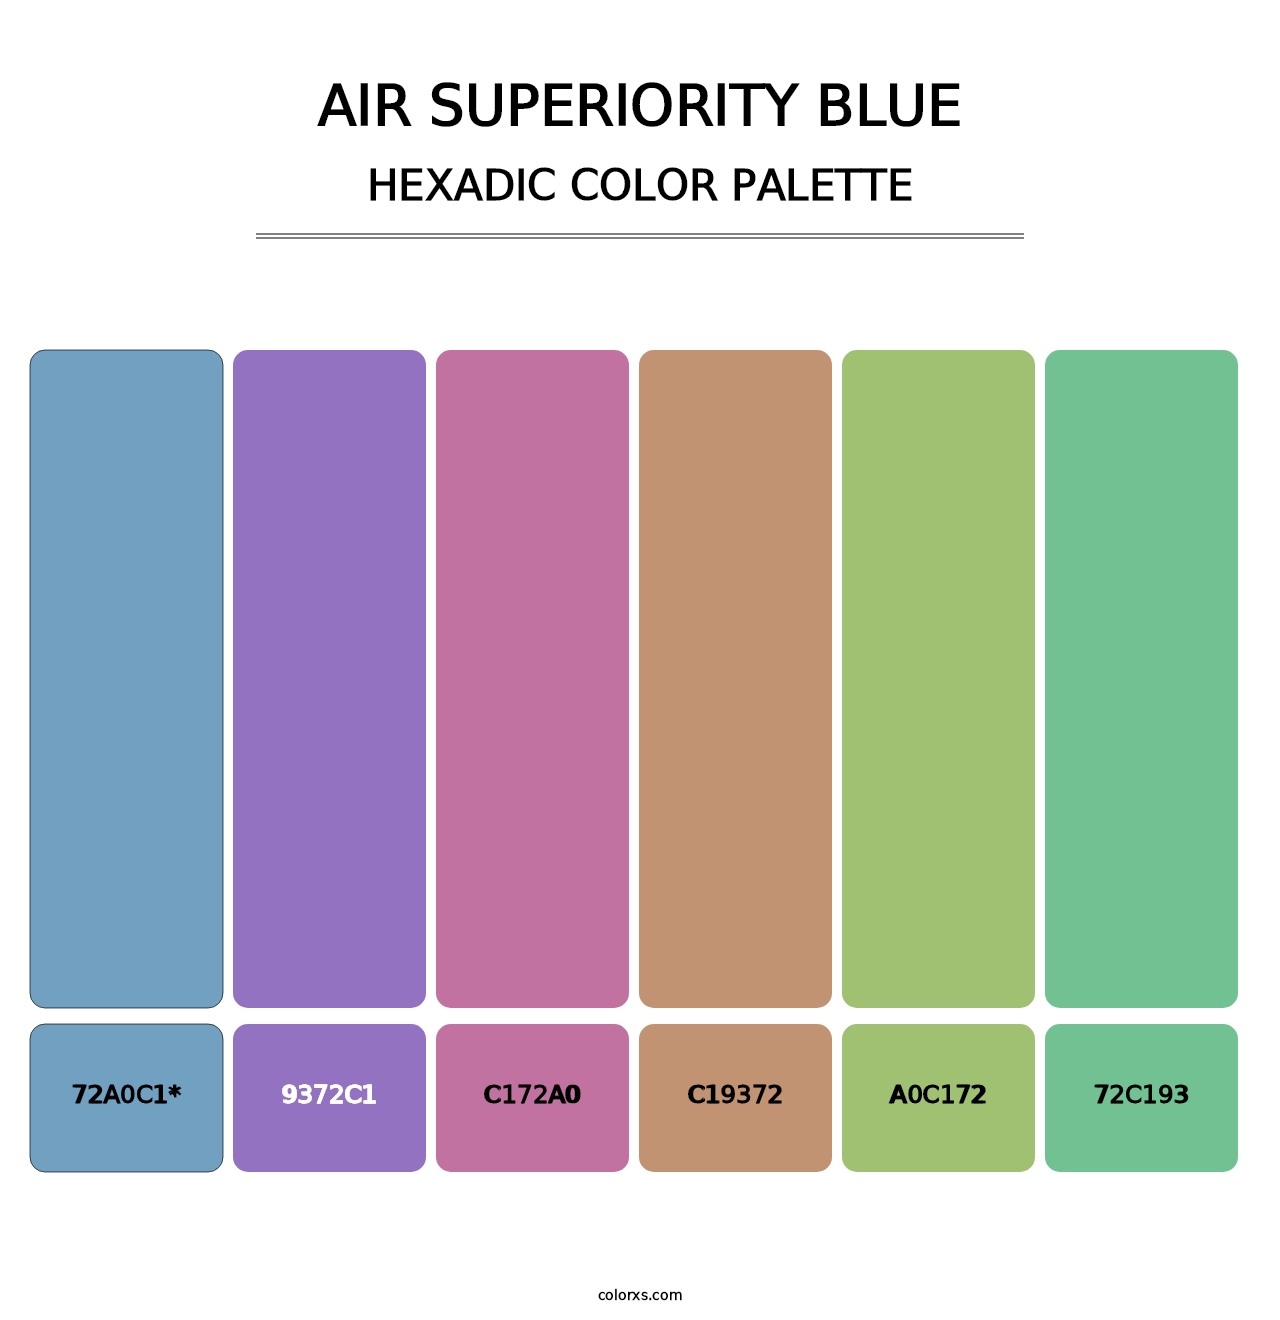 Air Superiority Blue - Hexadic Color Palette